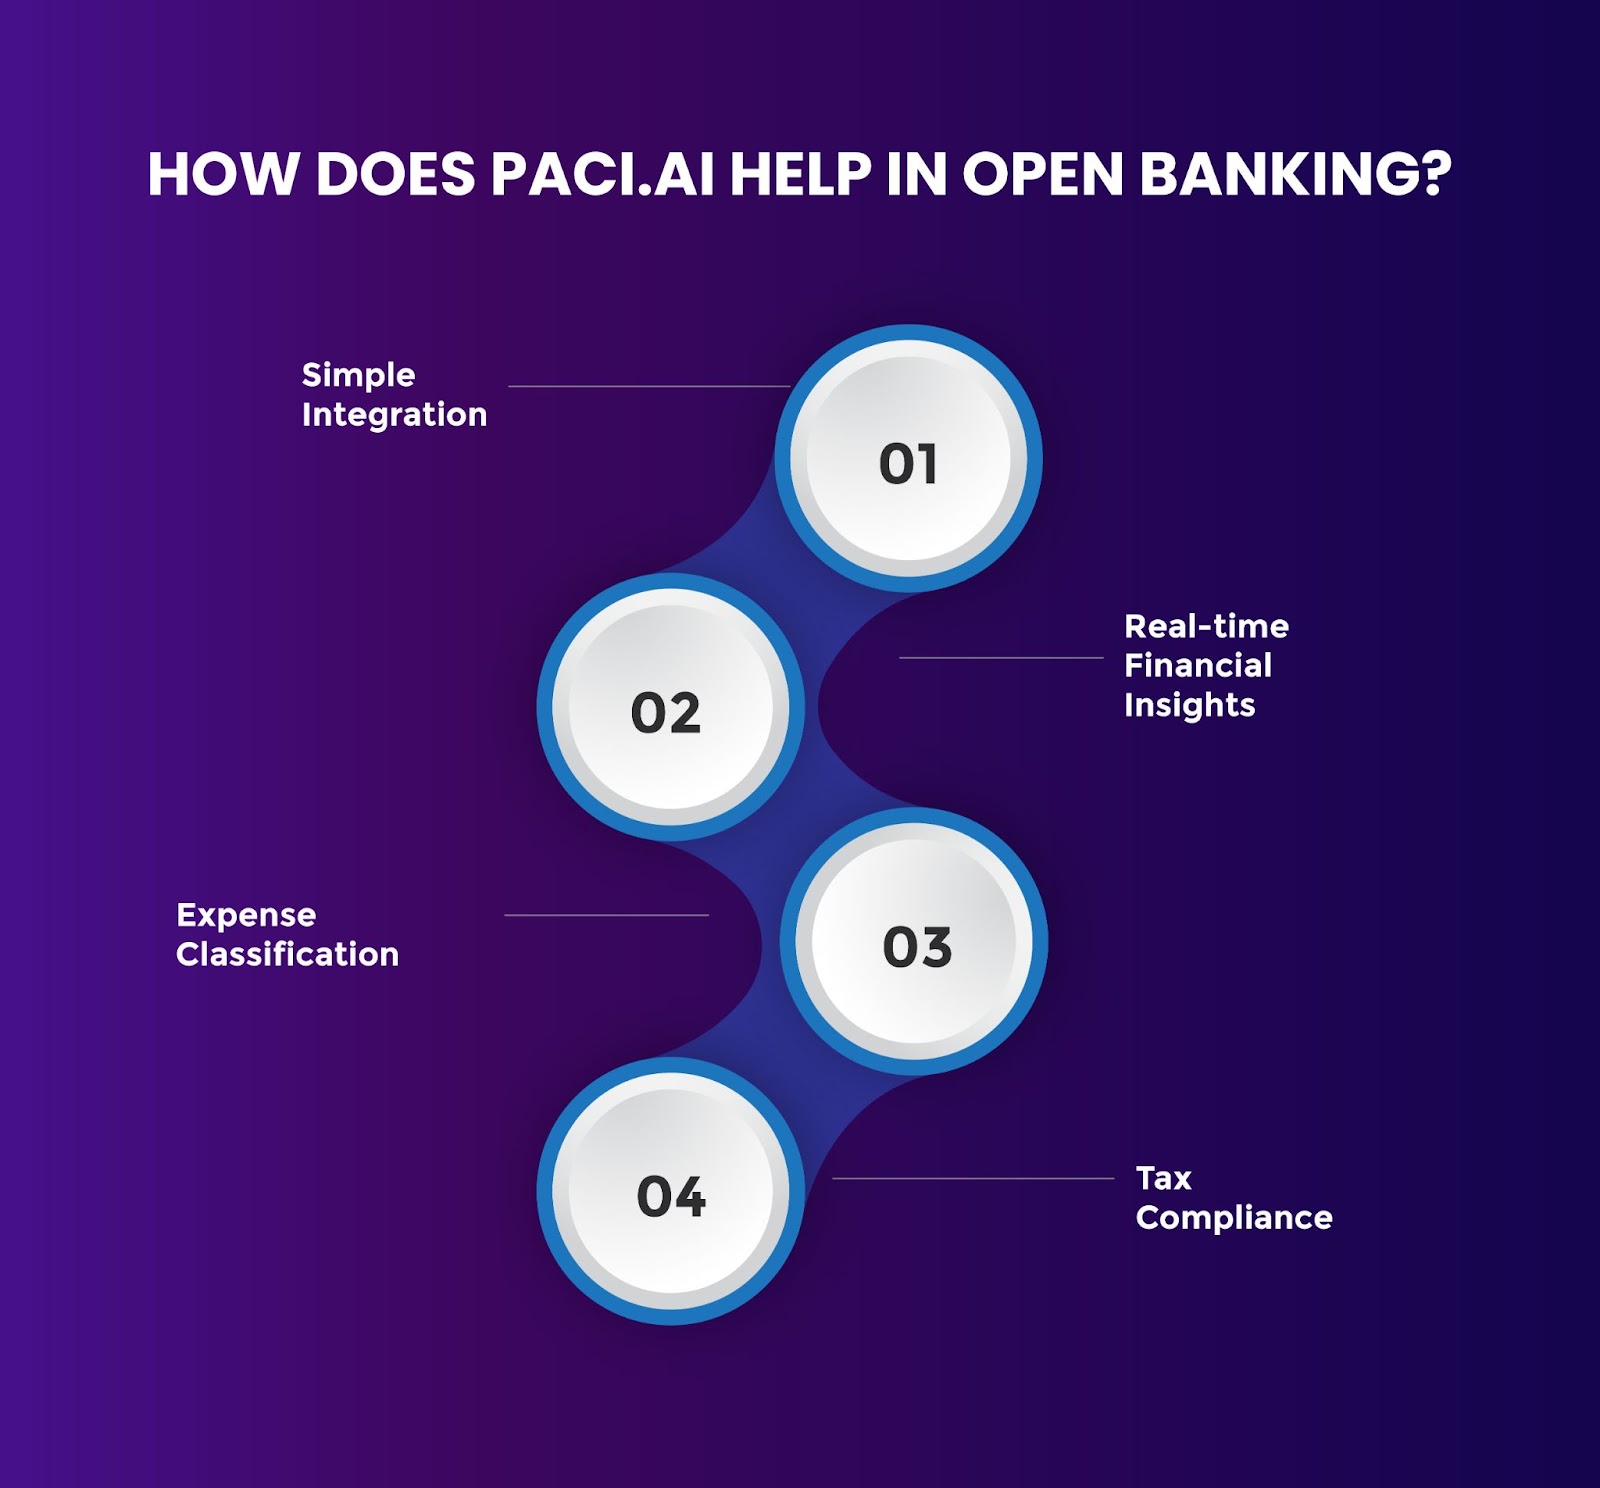 How does Paci.ai help in Open Banking?